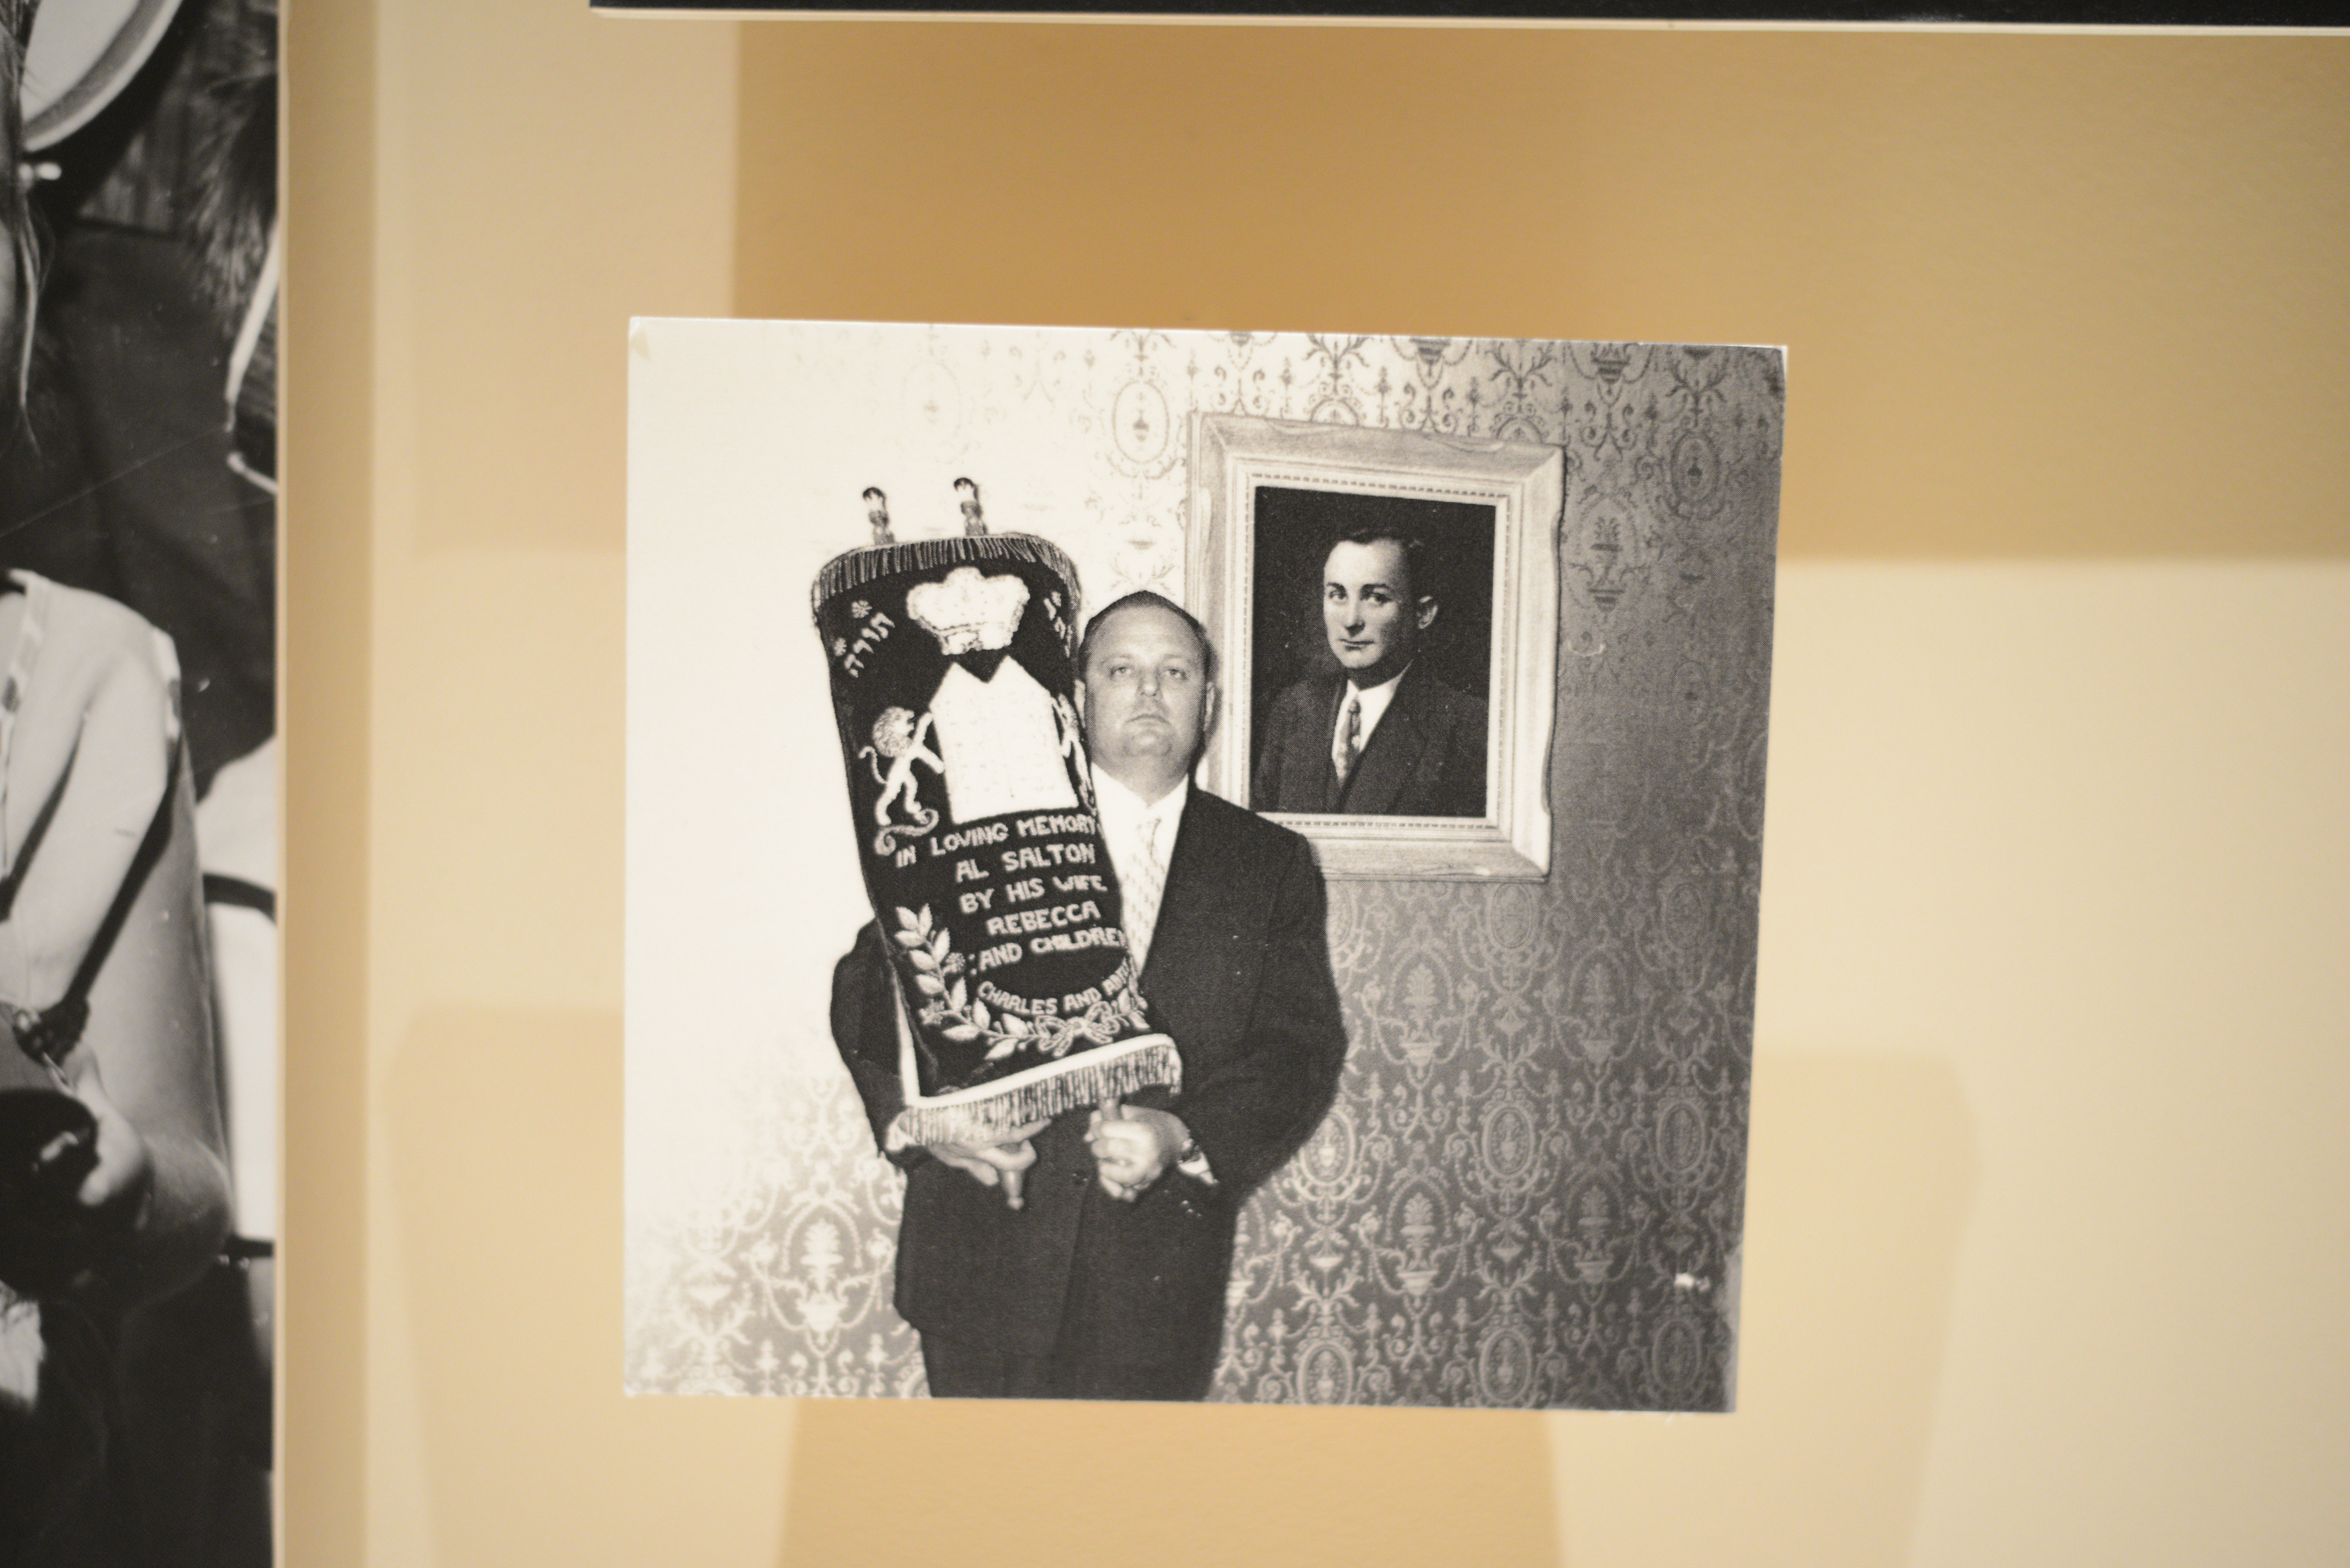 Photograph of man holding Torah scrolls with cover embroidered with ""In loving memory of Al Salton by his wife Rebecca and his children""